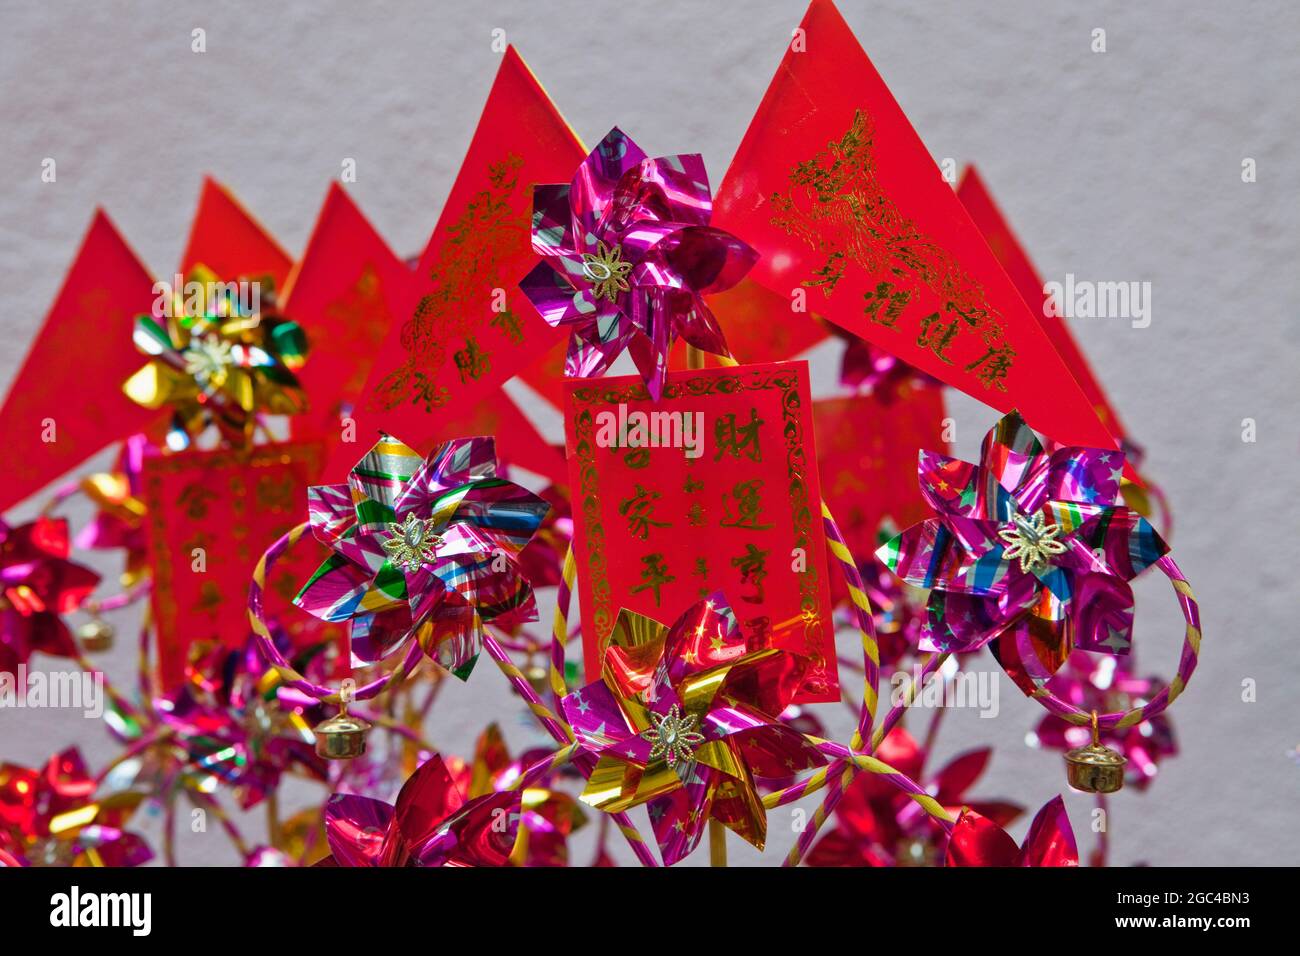 Decorations for New Year celebration in Hong Kong, China Stock Photo